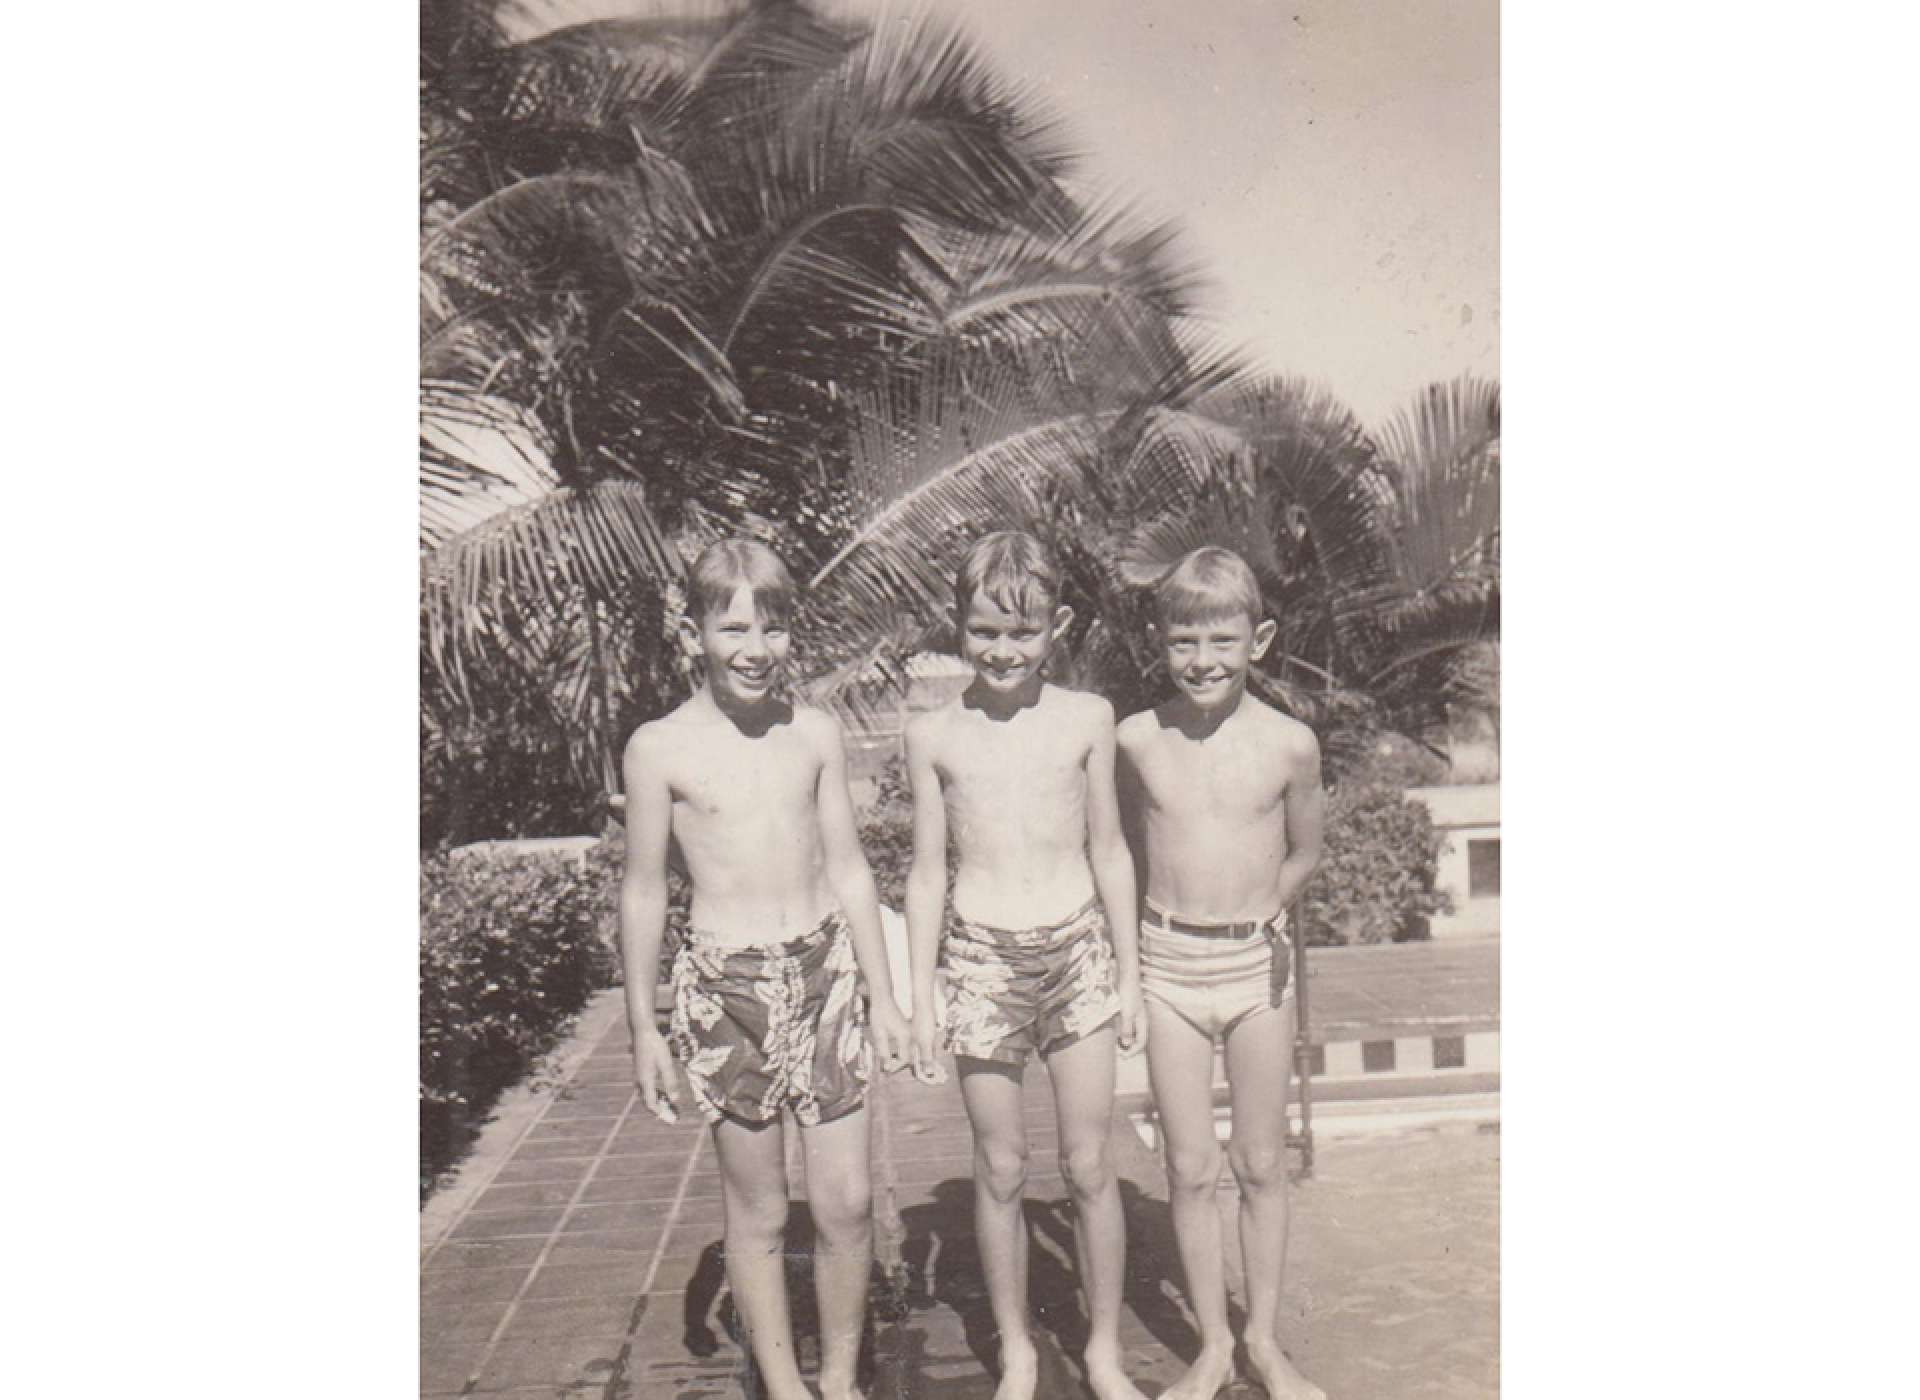 Thomas Gillette (center), Monty Higgins (on left) and a pal at the Pearl Harbor submarine base swimming pool in the summer of 1940. Image courtesy of Thomas Gillette.